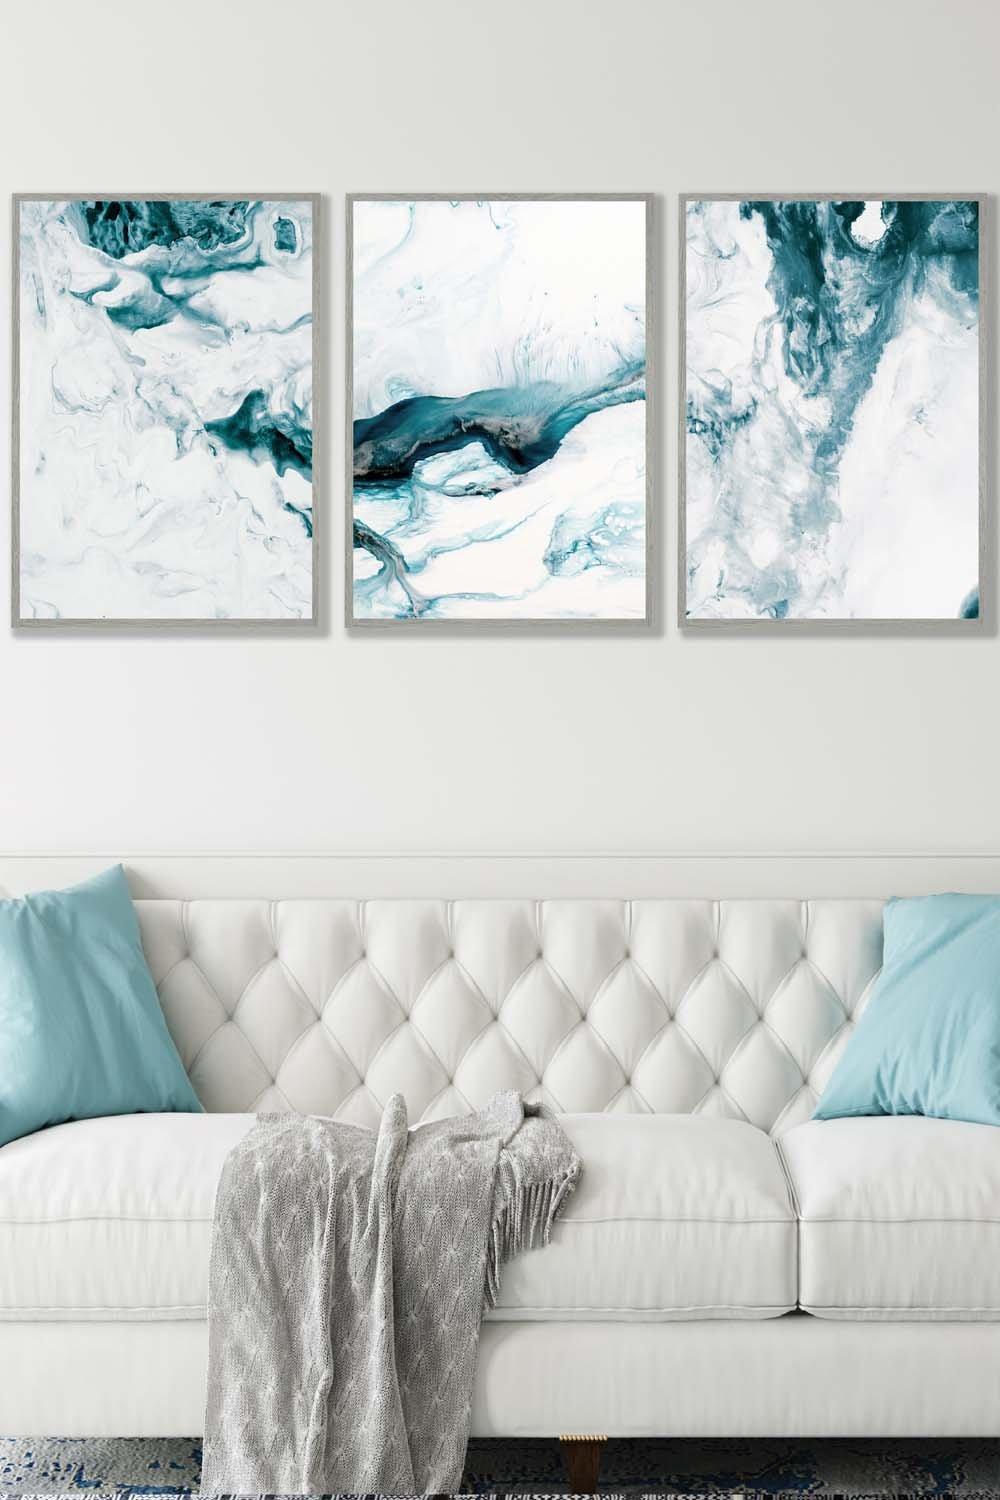 Teal Blue Abstract Ocean Waves Framed Wall Art - Large